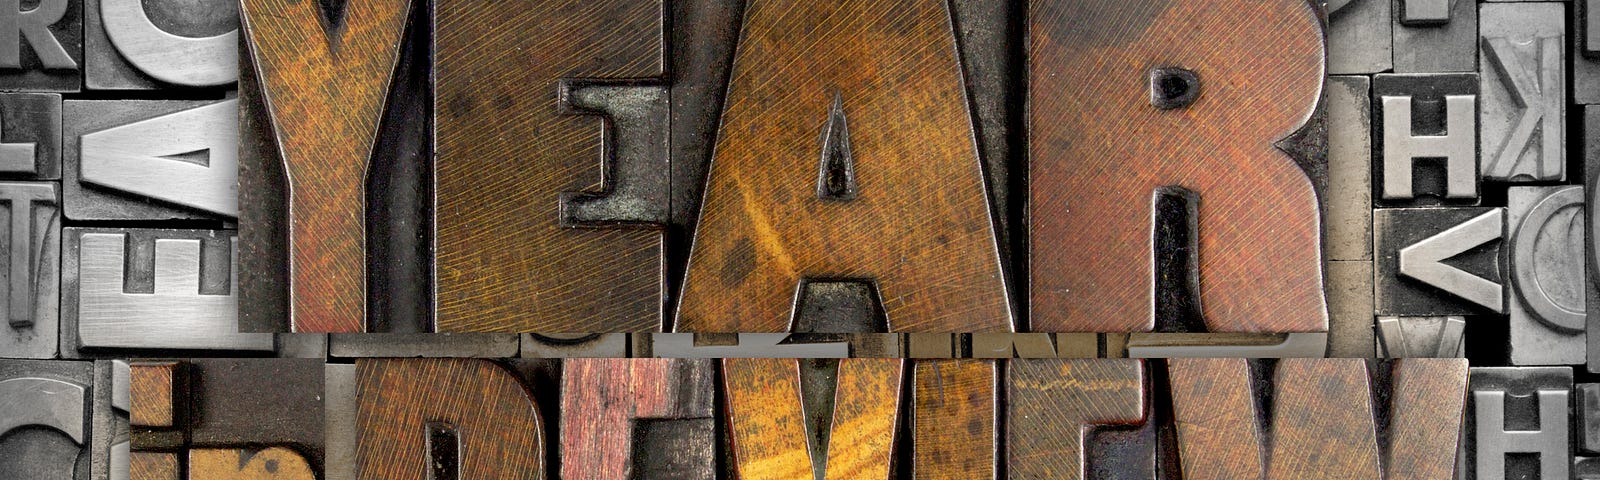 A graphic for an end of the year retrospective before New Year’s Day with the words “Year in Review” in wooden letters